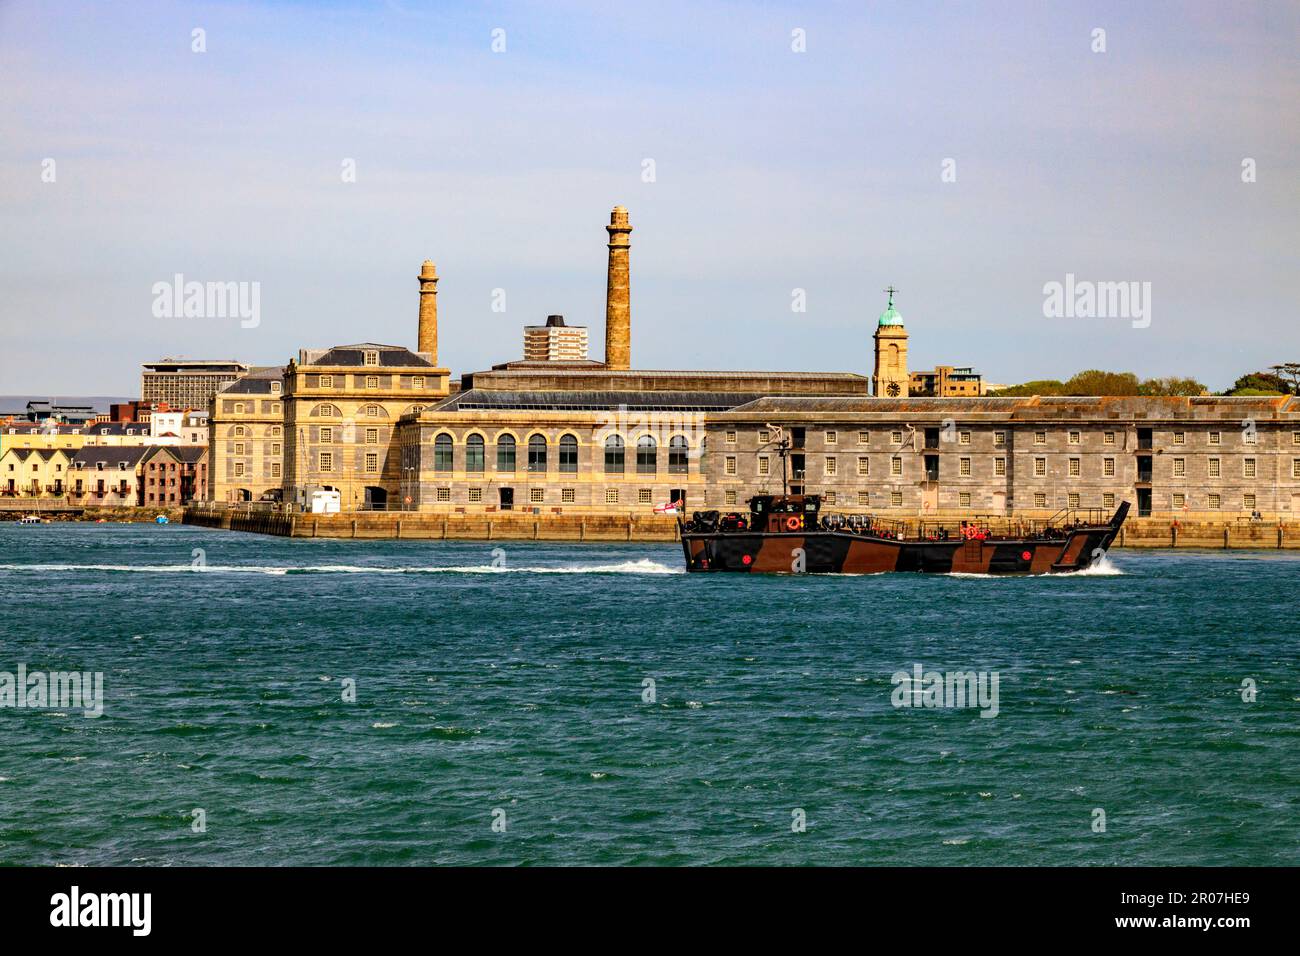 A camouflagued landng craft passes Royal William Yard, a former Royal Navy victualling yard in Plymouth, Devon, England, UK Stock Photo